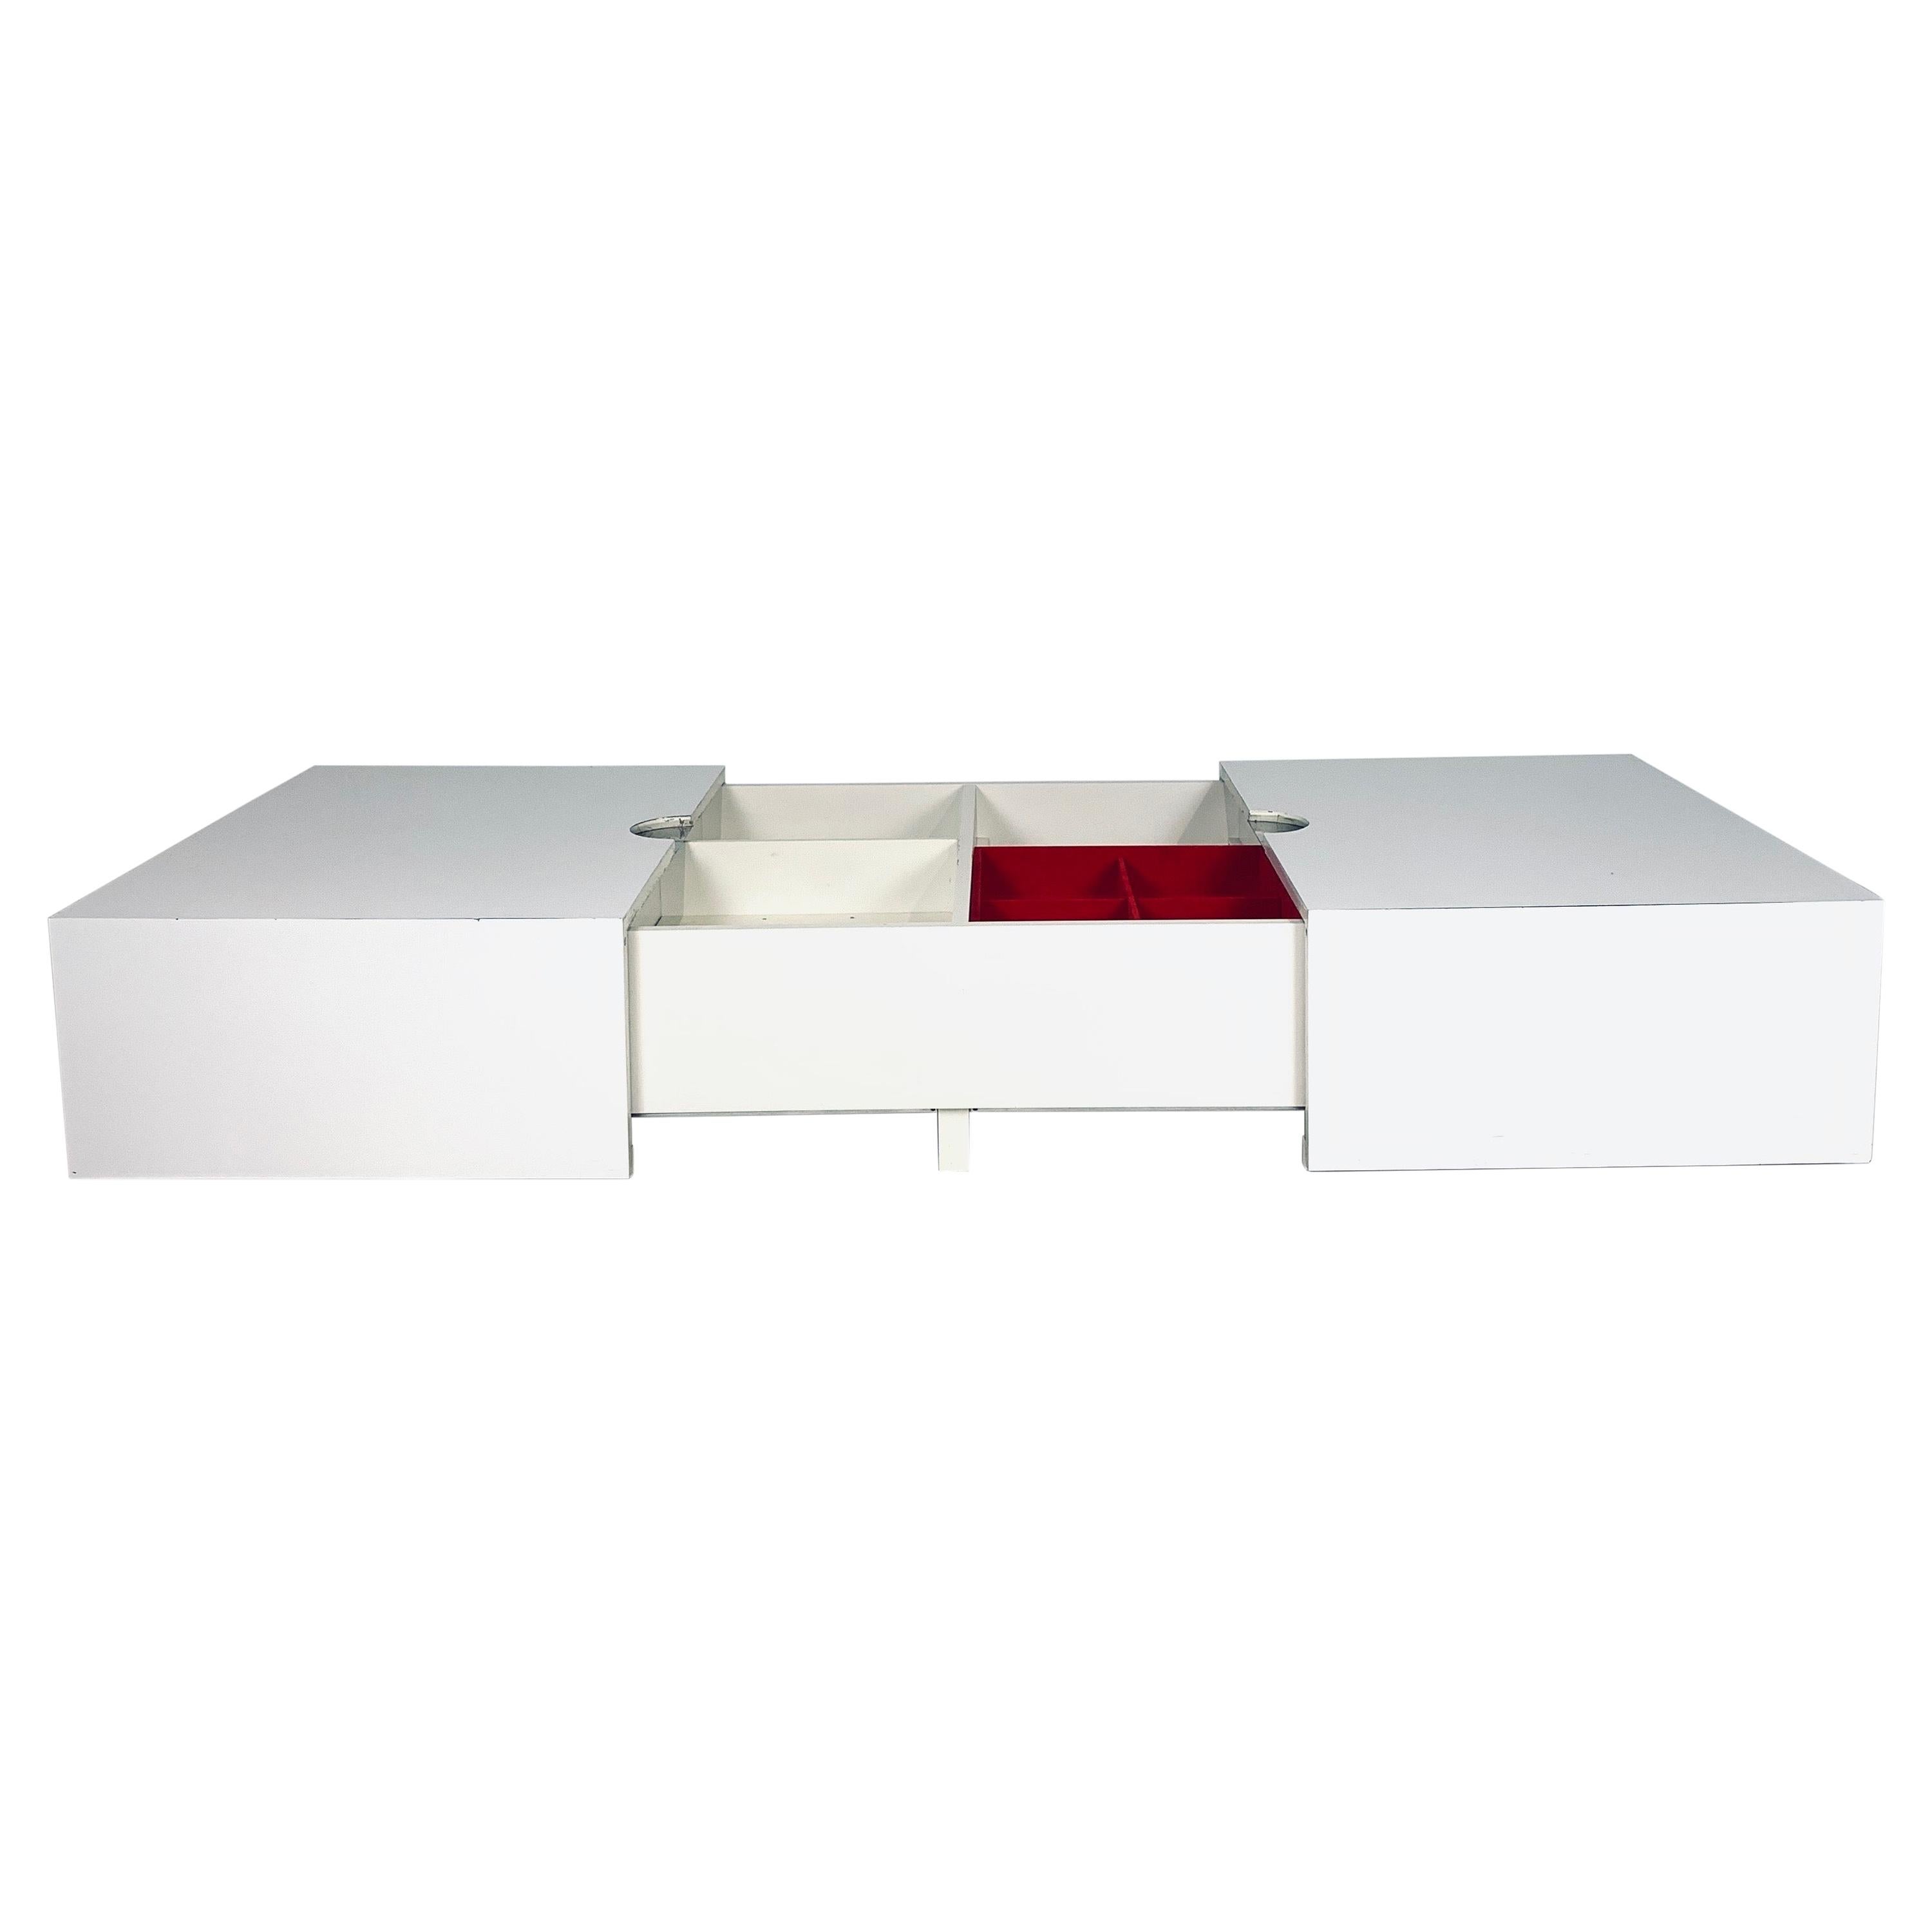 Monumental White & Stainless Op-Art Pop Convertible Storage / Bar / Coffee Table